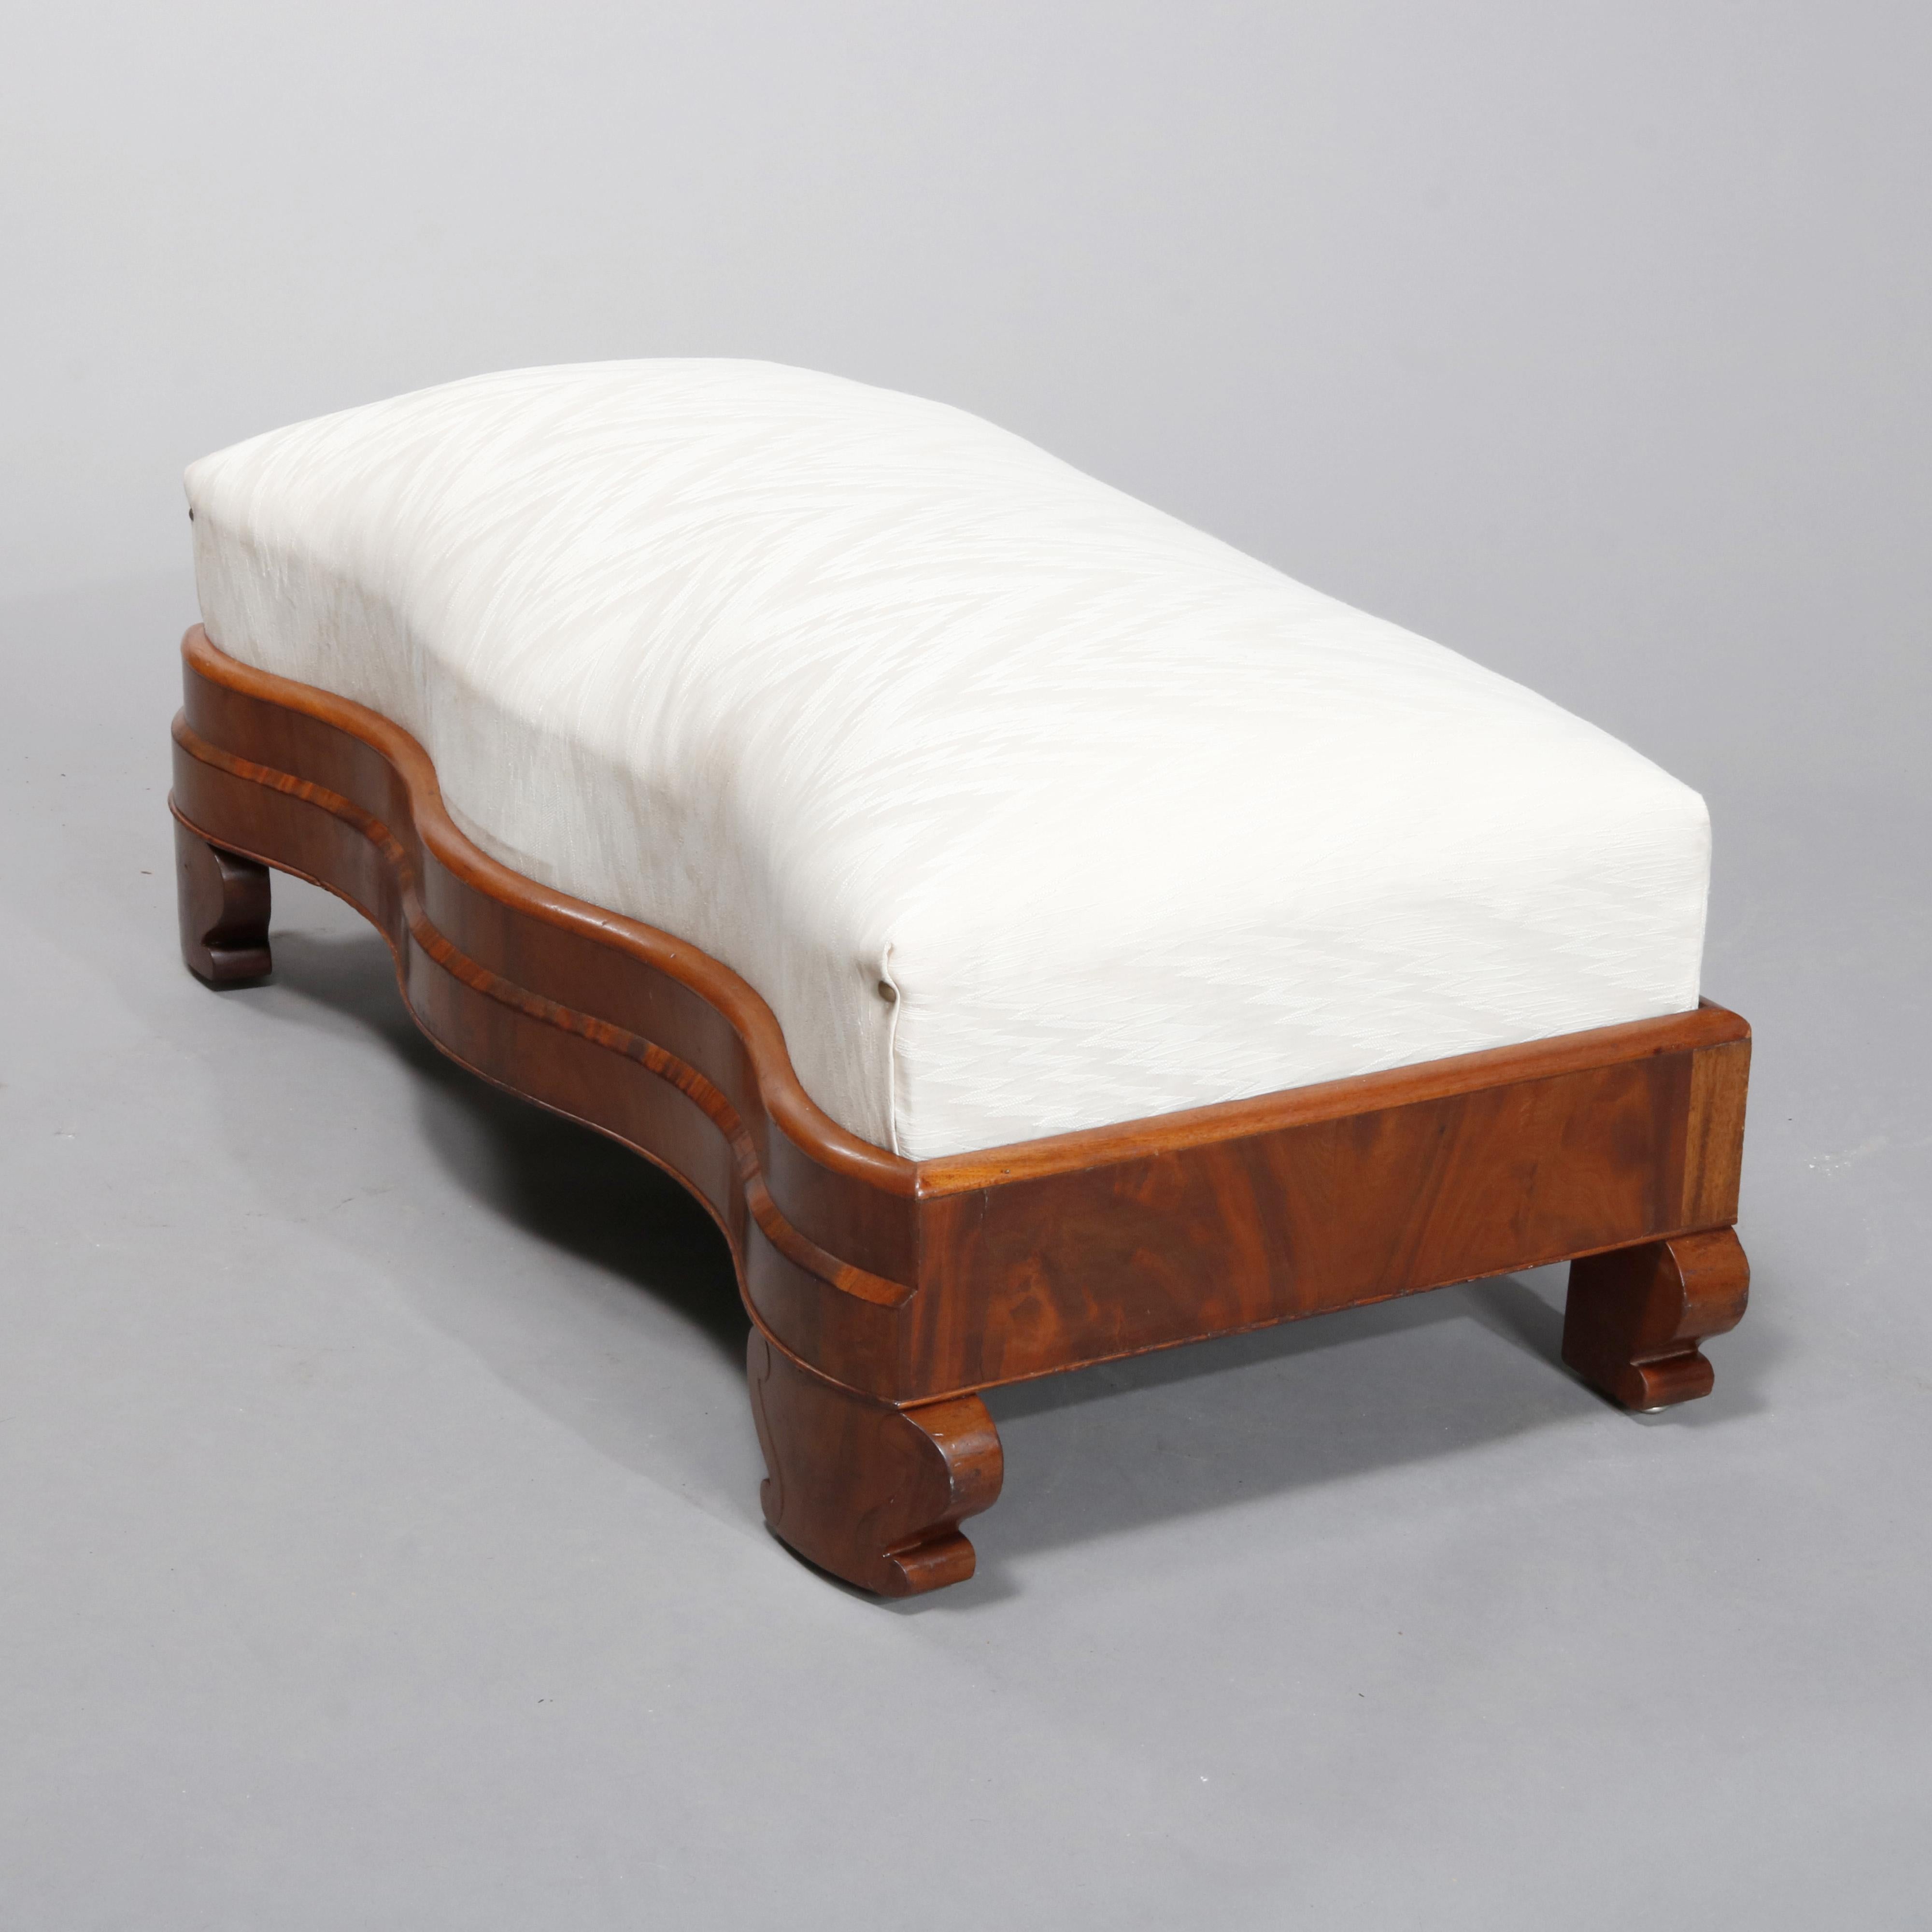 An antique American Empire classical slipper bench offers upholstered seat over serpentine flame mahogany frame raised on urn form feet, circa 1840

Measures: 14.75